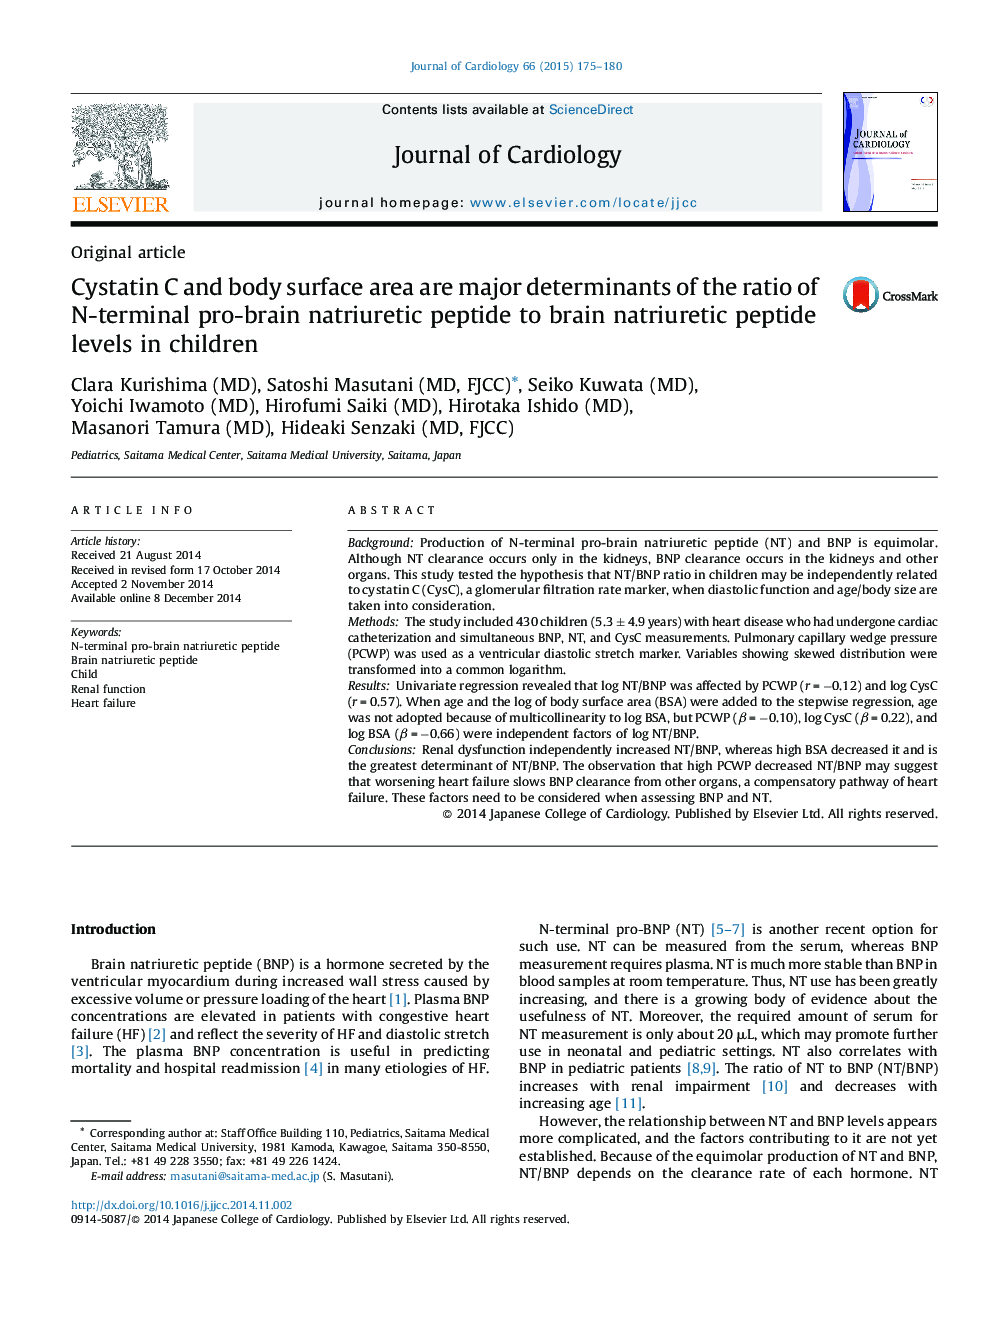 Cystatin C and body surface area are major determinants of the ratio of N-terminal pro-brain natriuretic peptide to brain natriuretic peptide levels in children